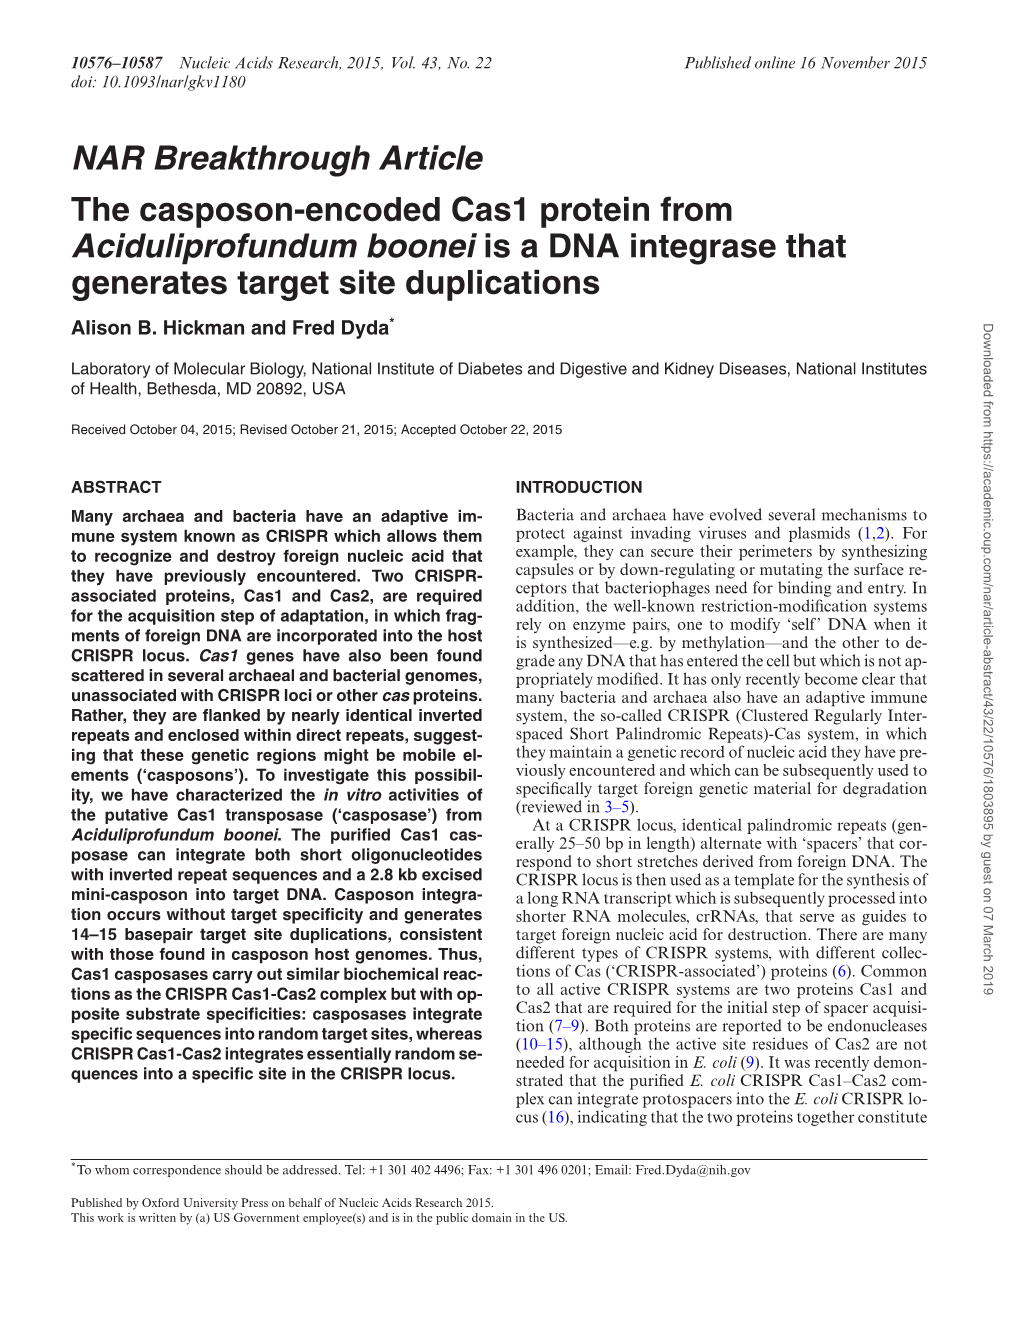 NAR Breakthrough Article the Casposon-Encoded Cas1 Protein from Aciduliprofundum Boonei Is a DNA Integrase That Generates Target Site Duplications